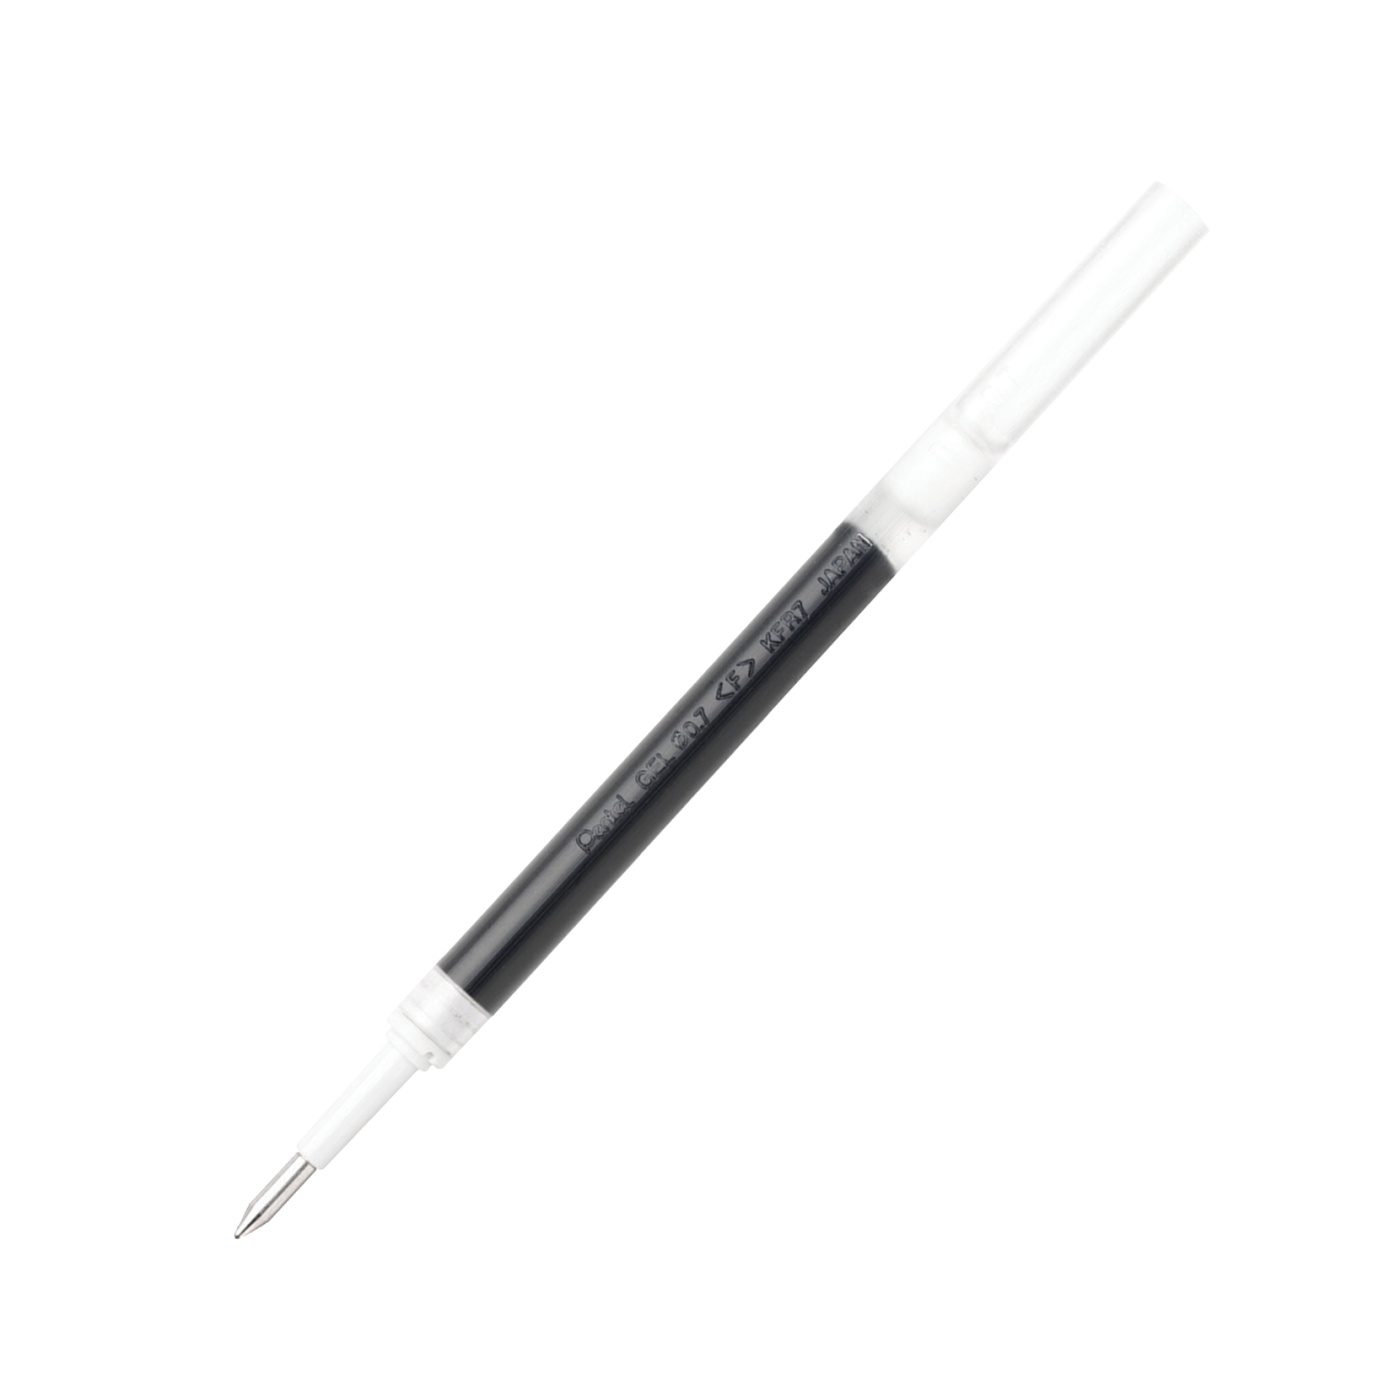 KLR7 Refill in the group Pens / Pen Accessories / Cartridges & Refills at Pen Store (104587_r)